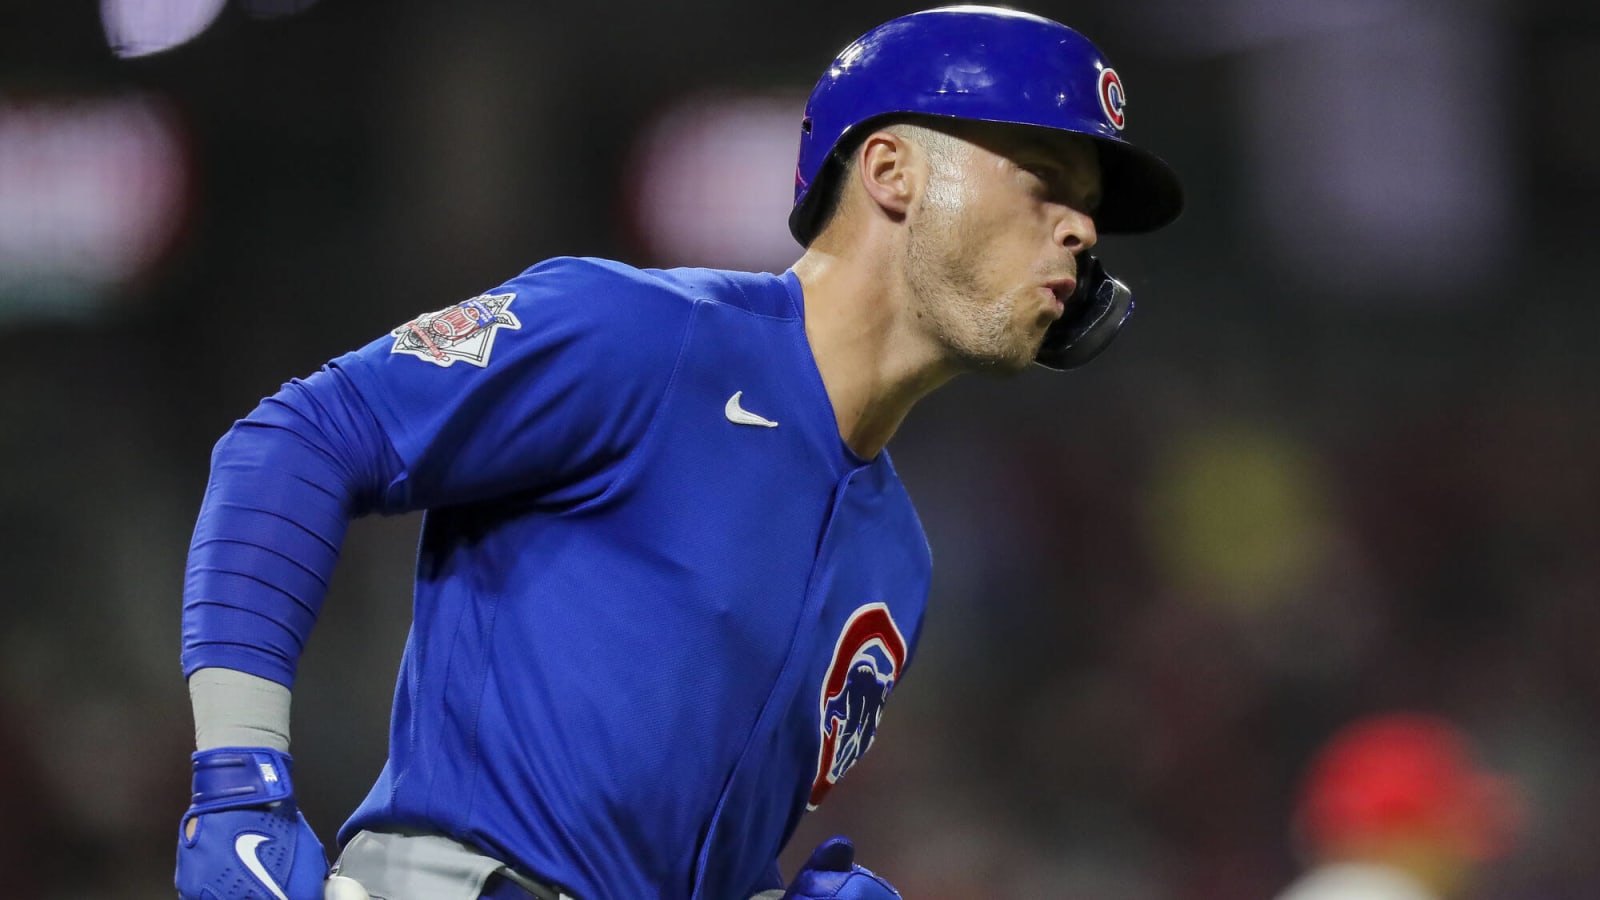 This is where I want to be': Cubs' Hoerner hopes signing extension will  have lasting benefits